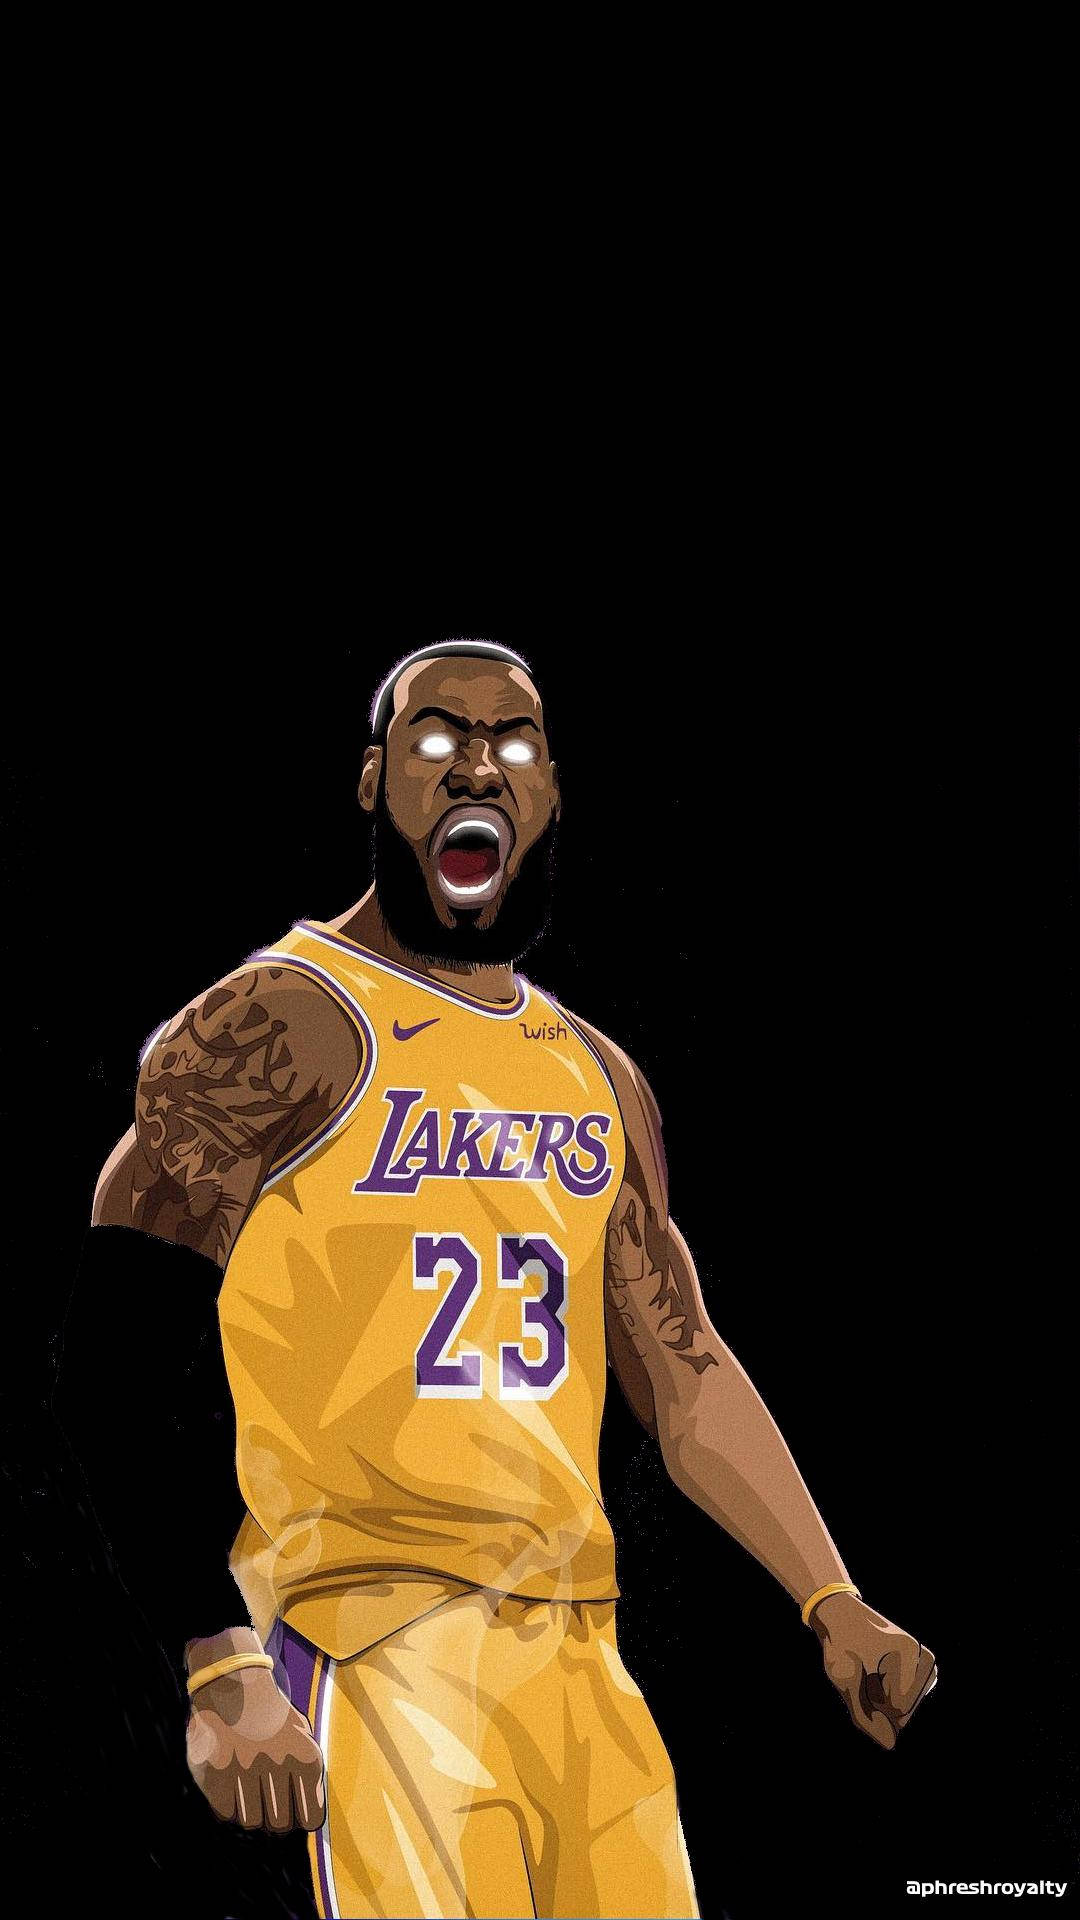 Unlock Your Lakers Spirit with this Unique iPhone Design Wallpaper